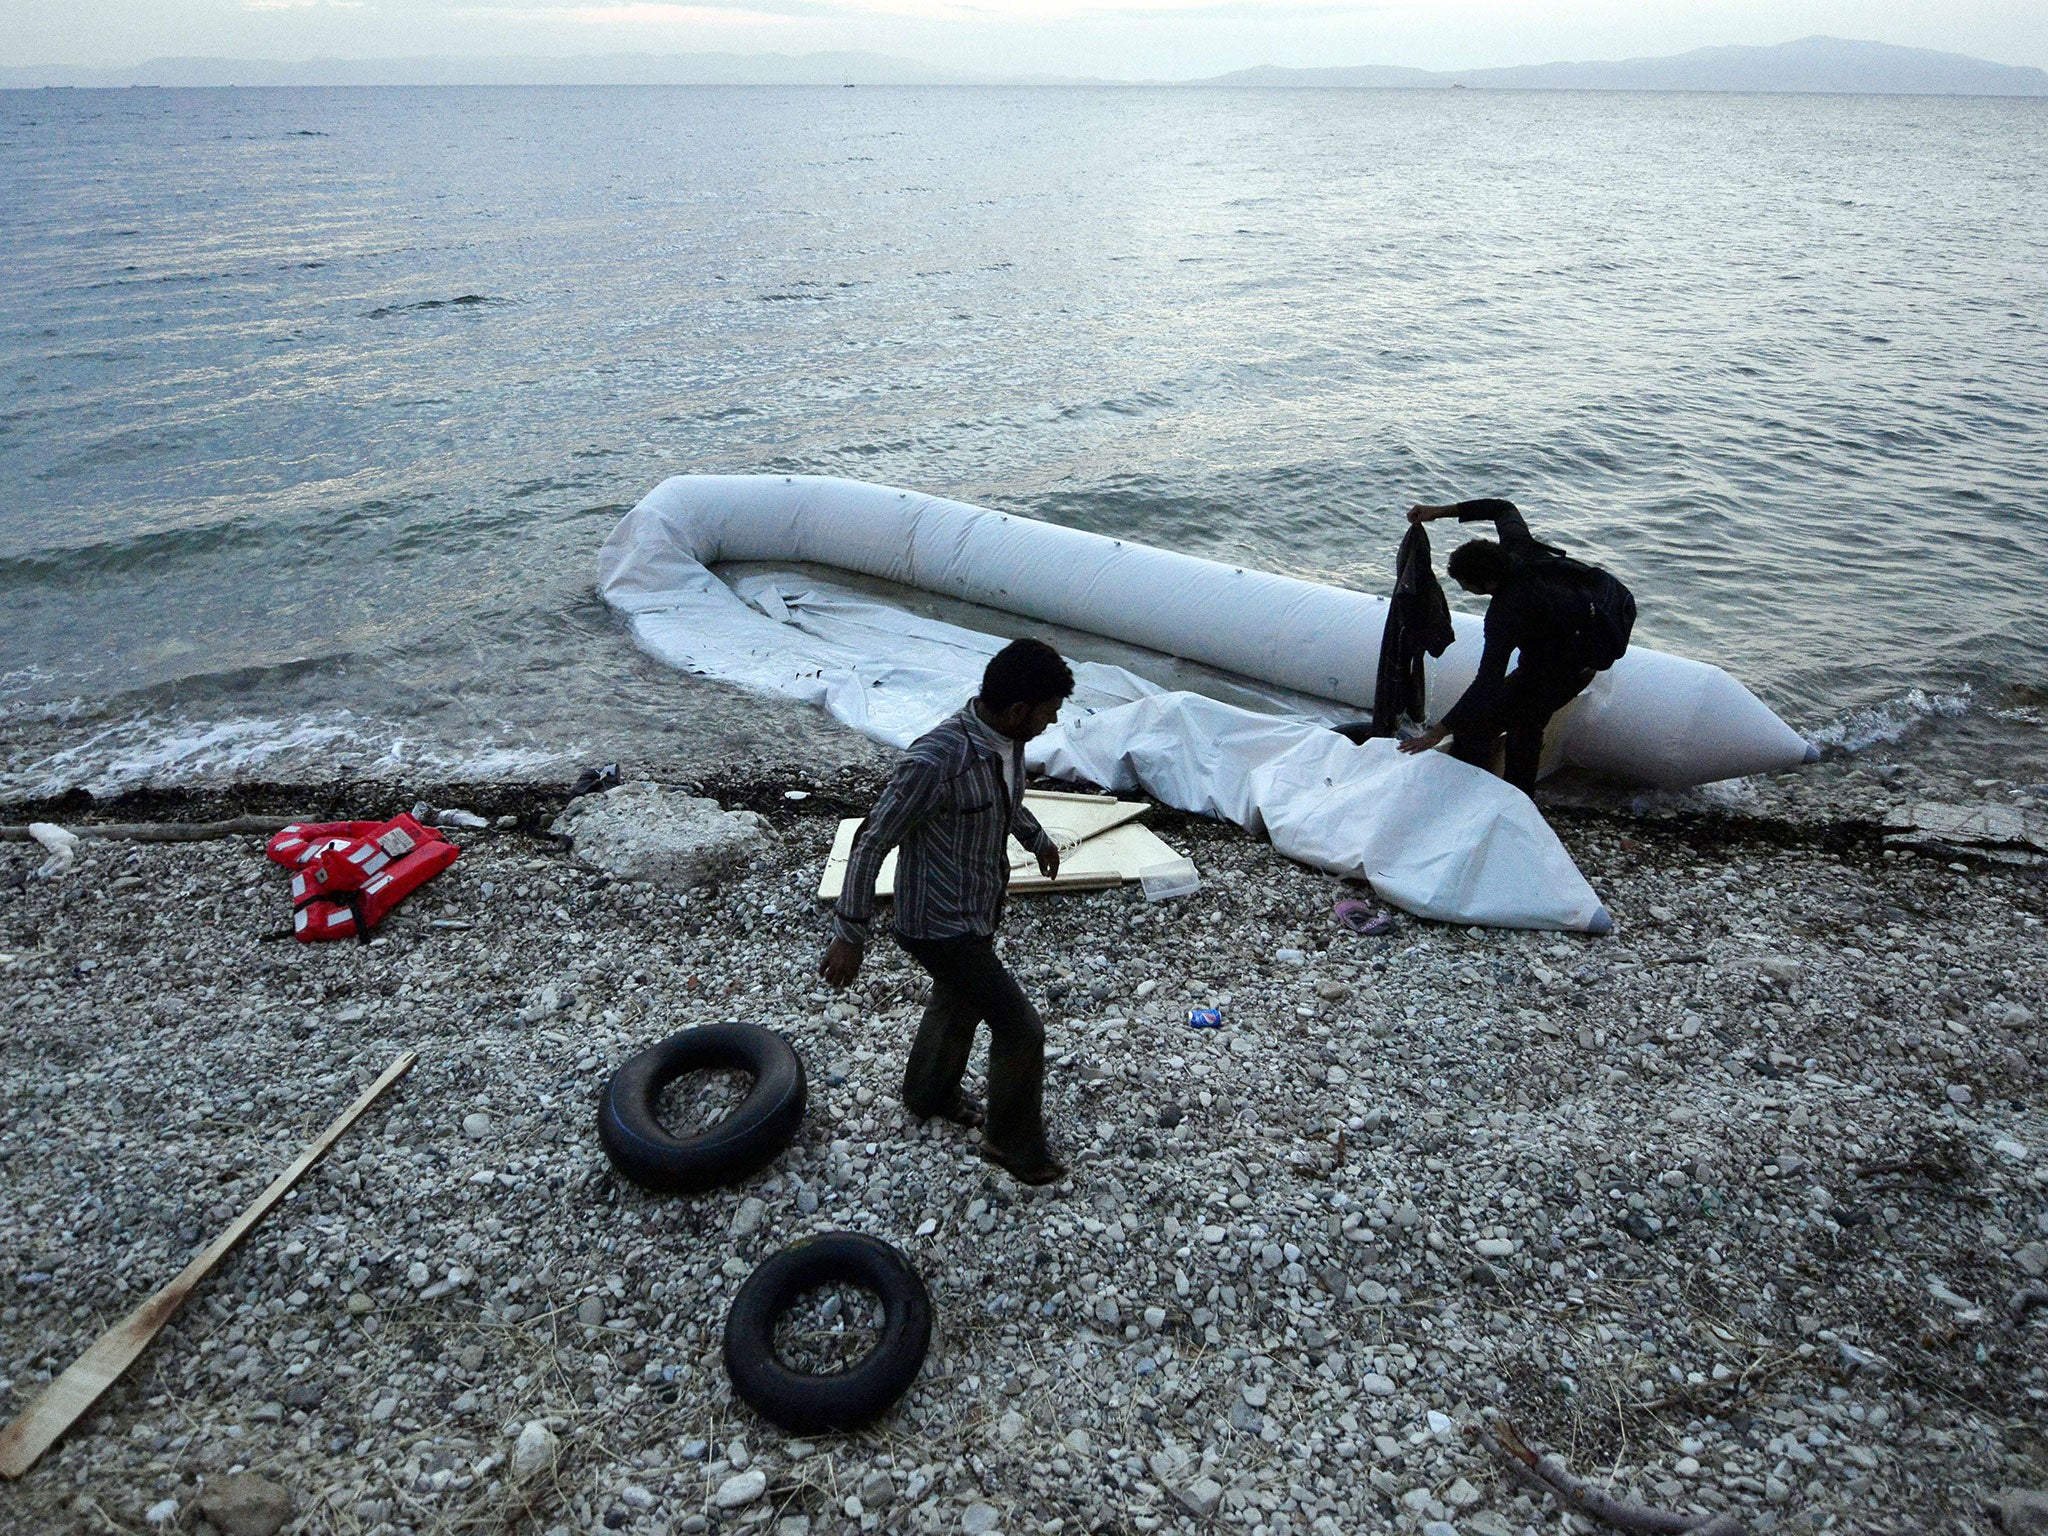 Migrants are taken to Lesbos on dinghys by human smugglers